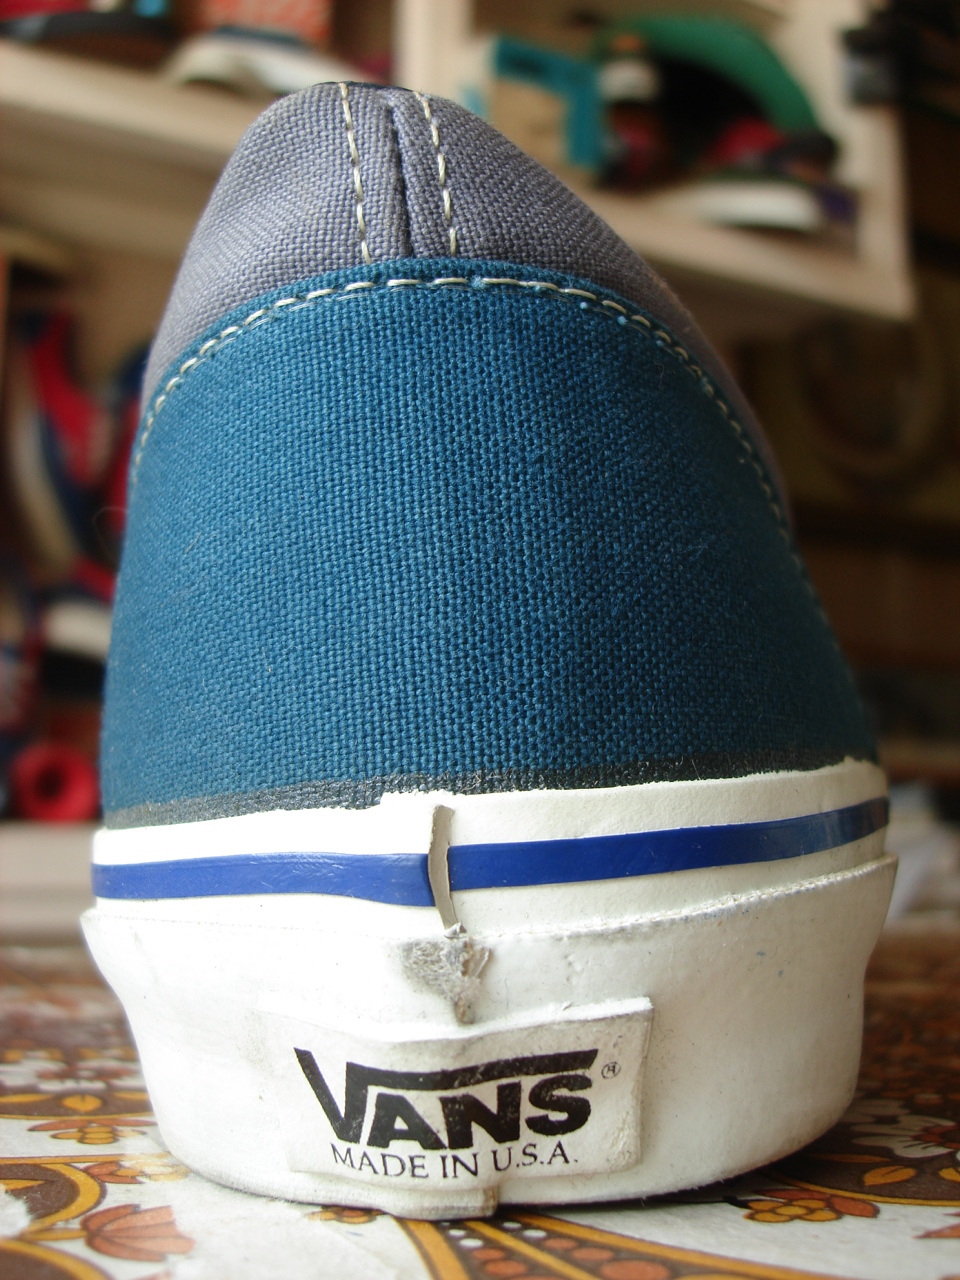 chinese vans shoes